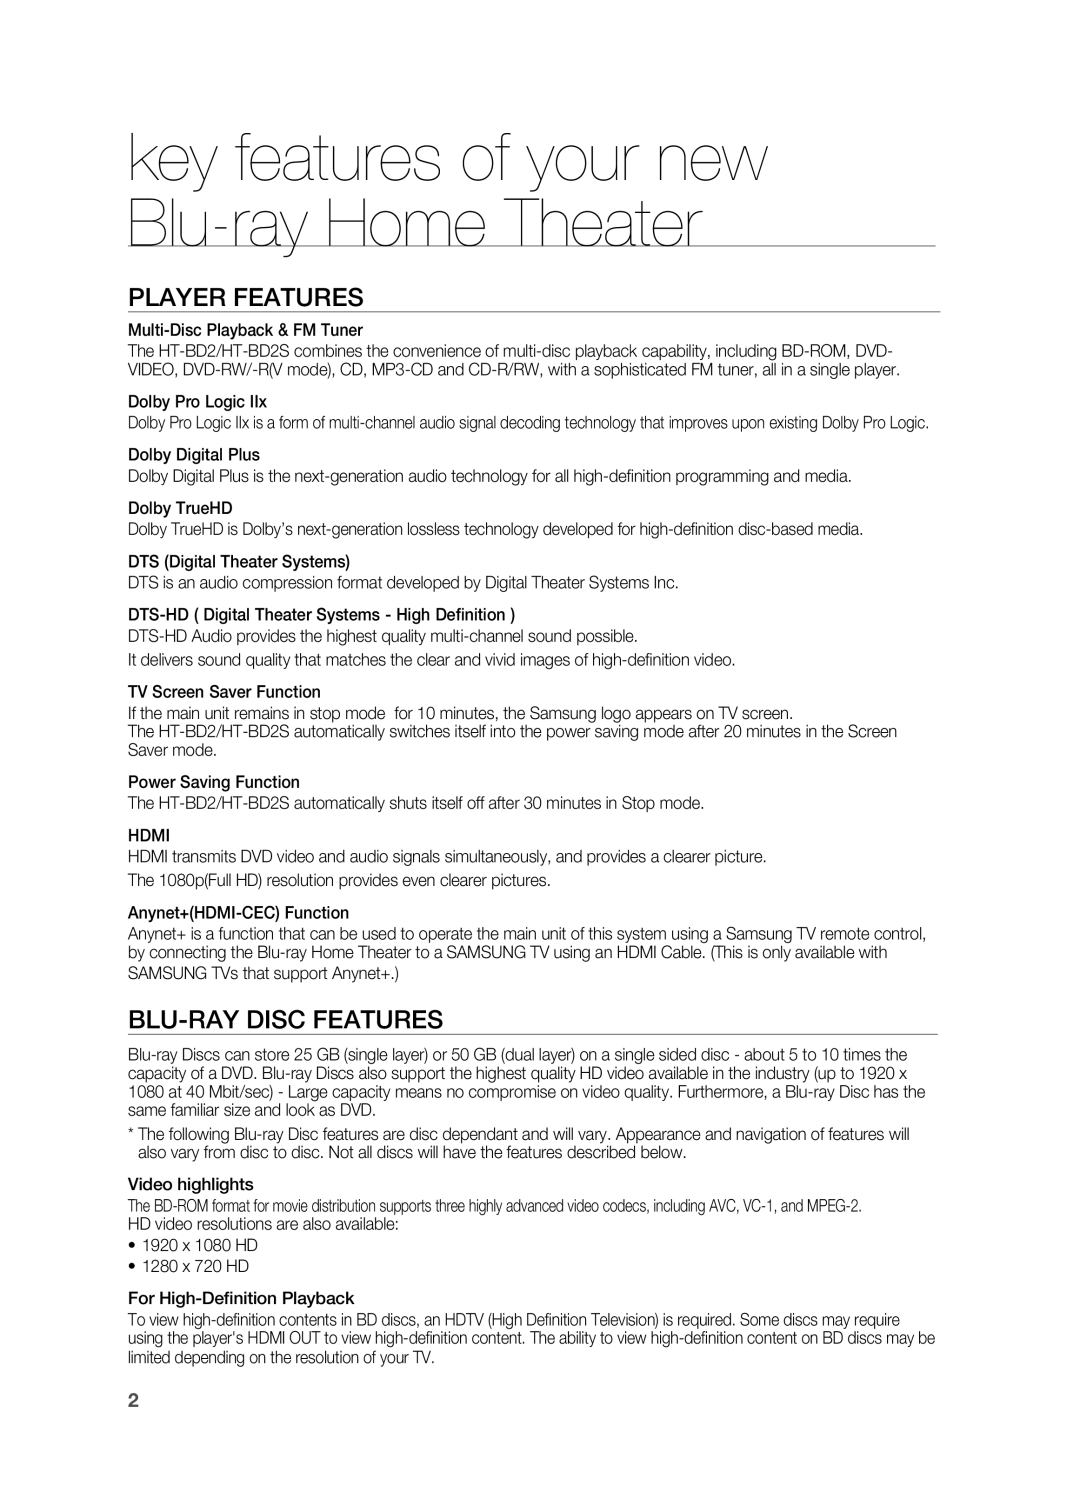 Samsung HT-BD2S manual key features of your new Blu-rayHome Theater, Player Features, Blu-Raydisc Features 